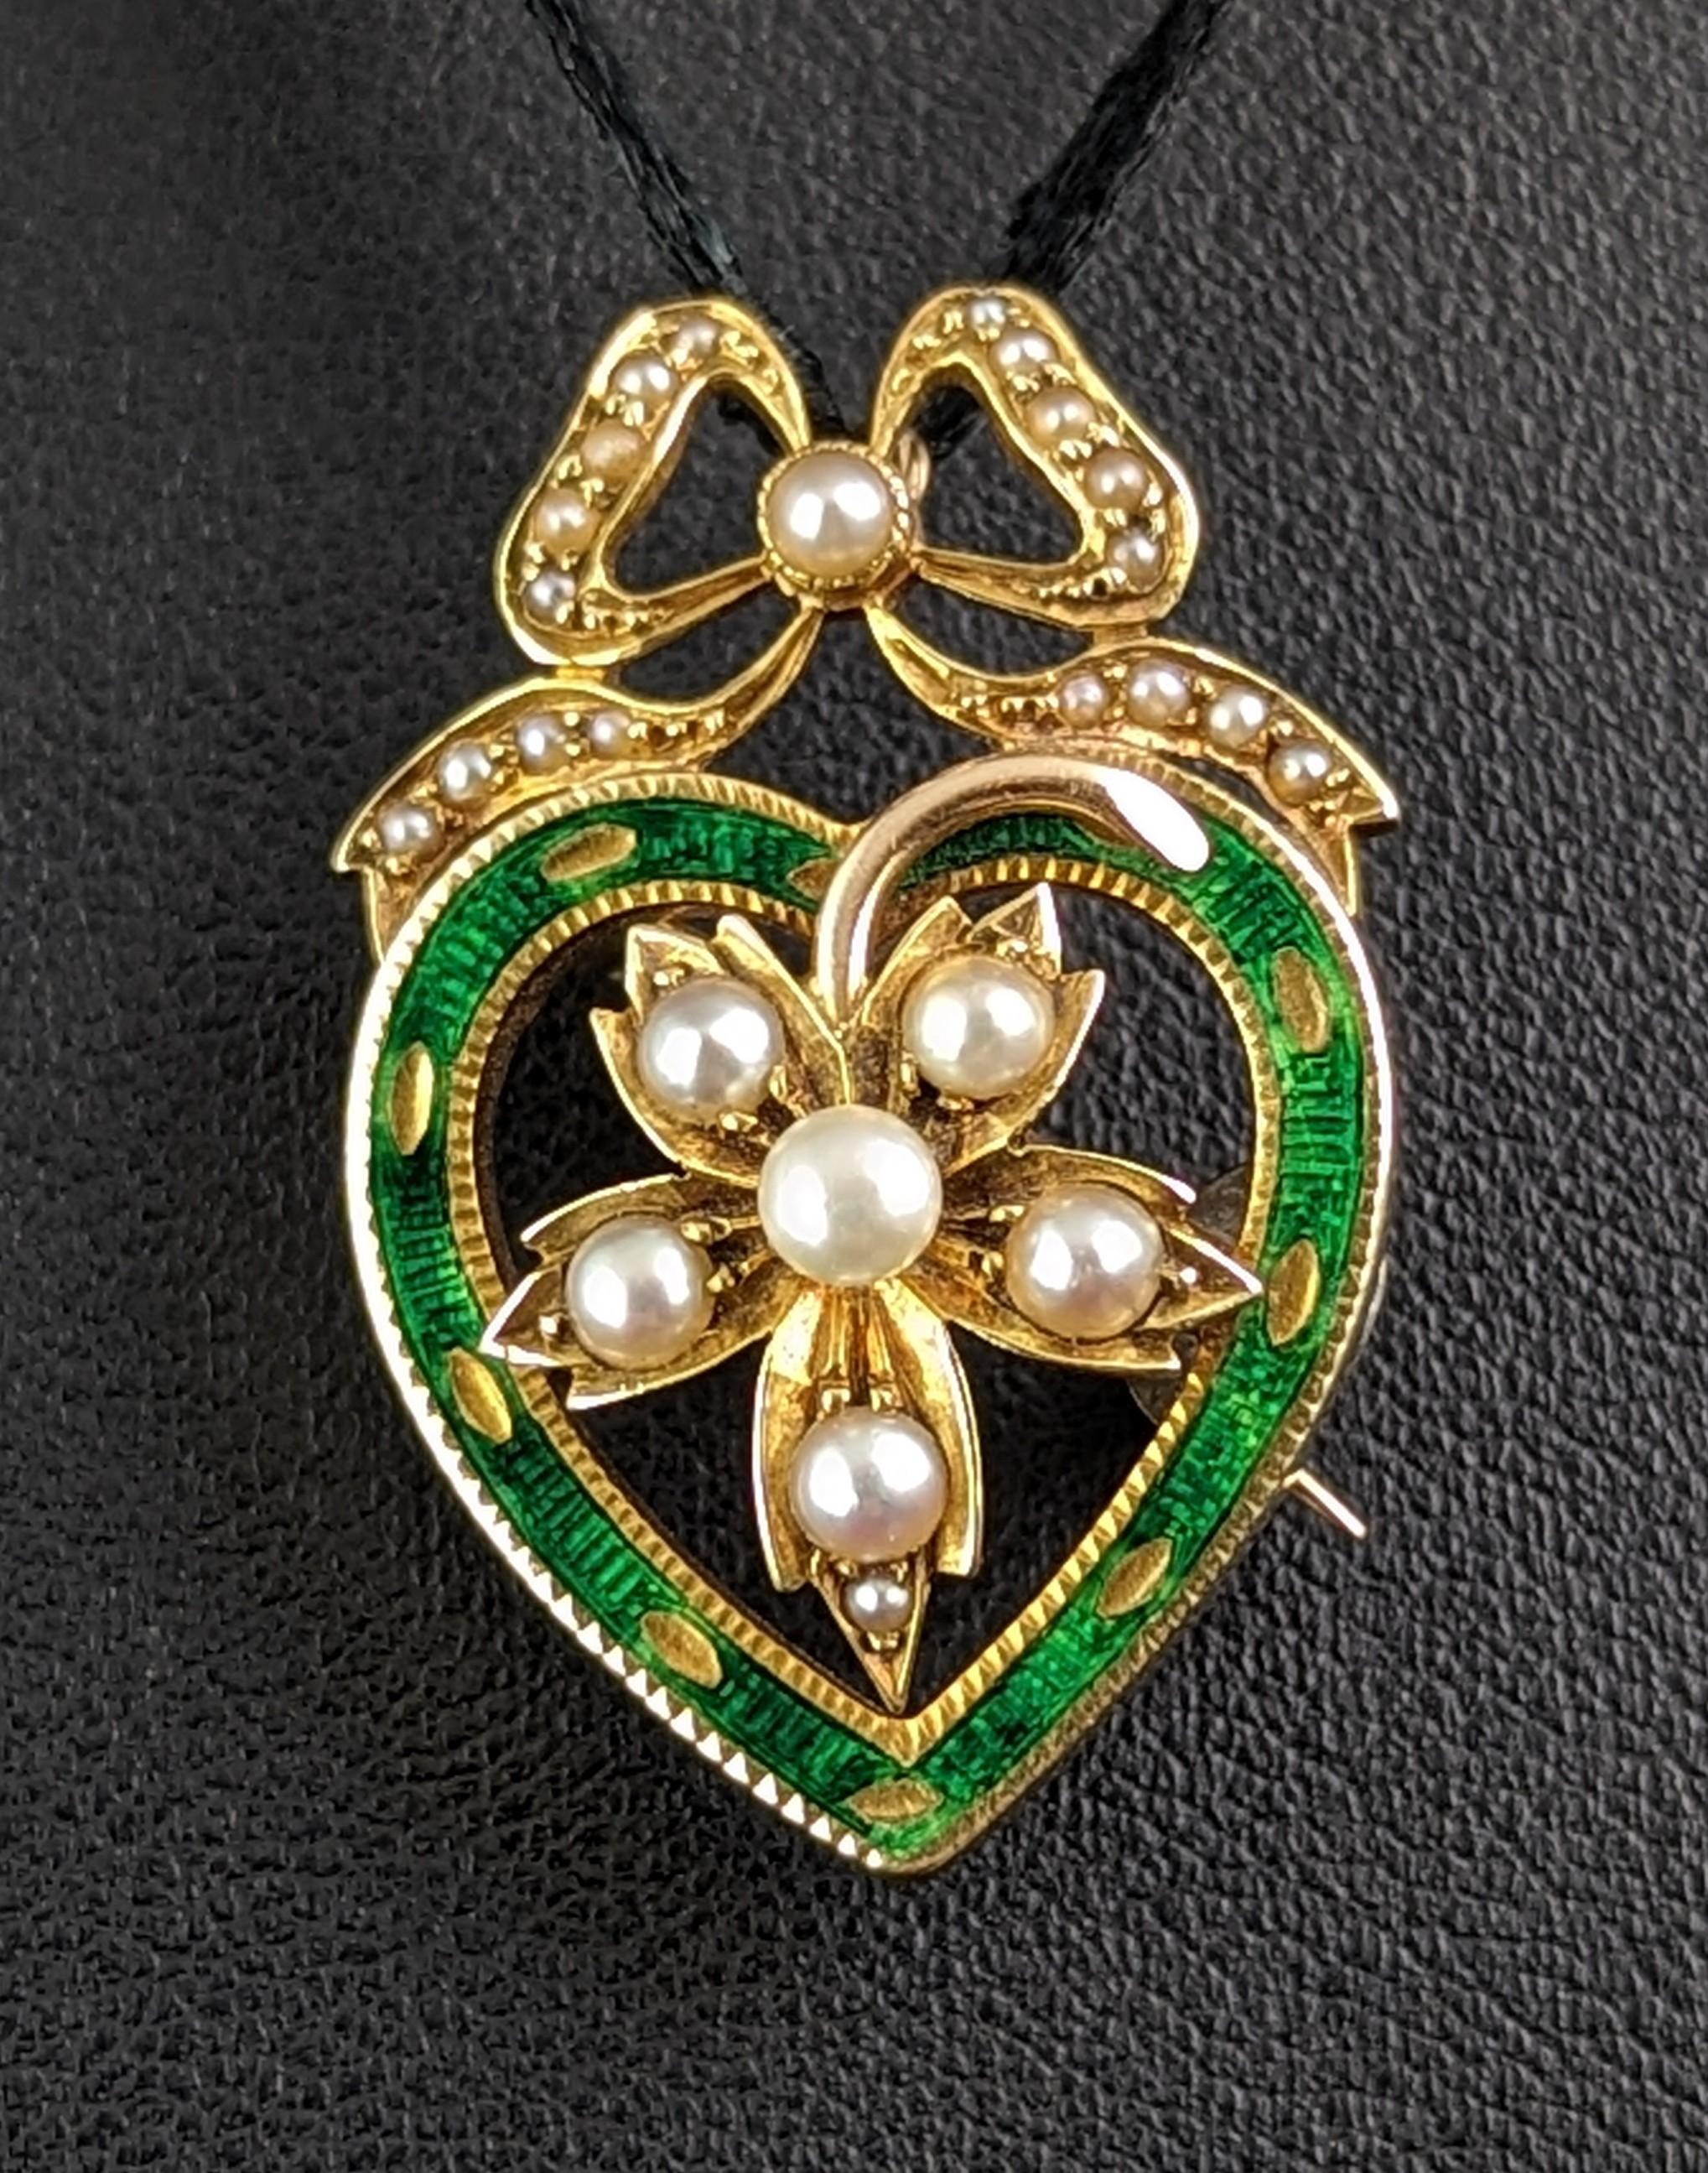 This antique Green Enamel and Pearl Heart pendant brooch is simply divine.

A beautifully designed piece it is crafted in 9ct yellow gold in a heart shape with a bow design top and a pearl adorned leaf to the centre.

The heart is decorated with a